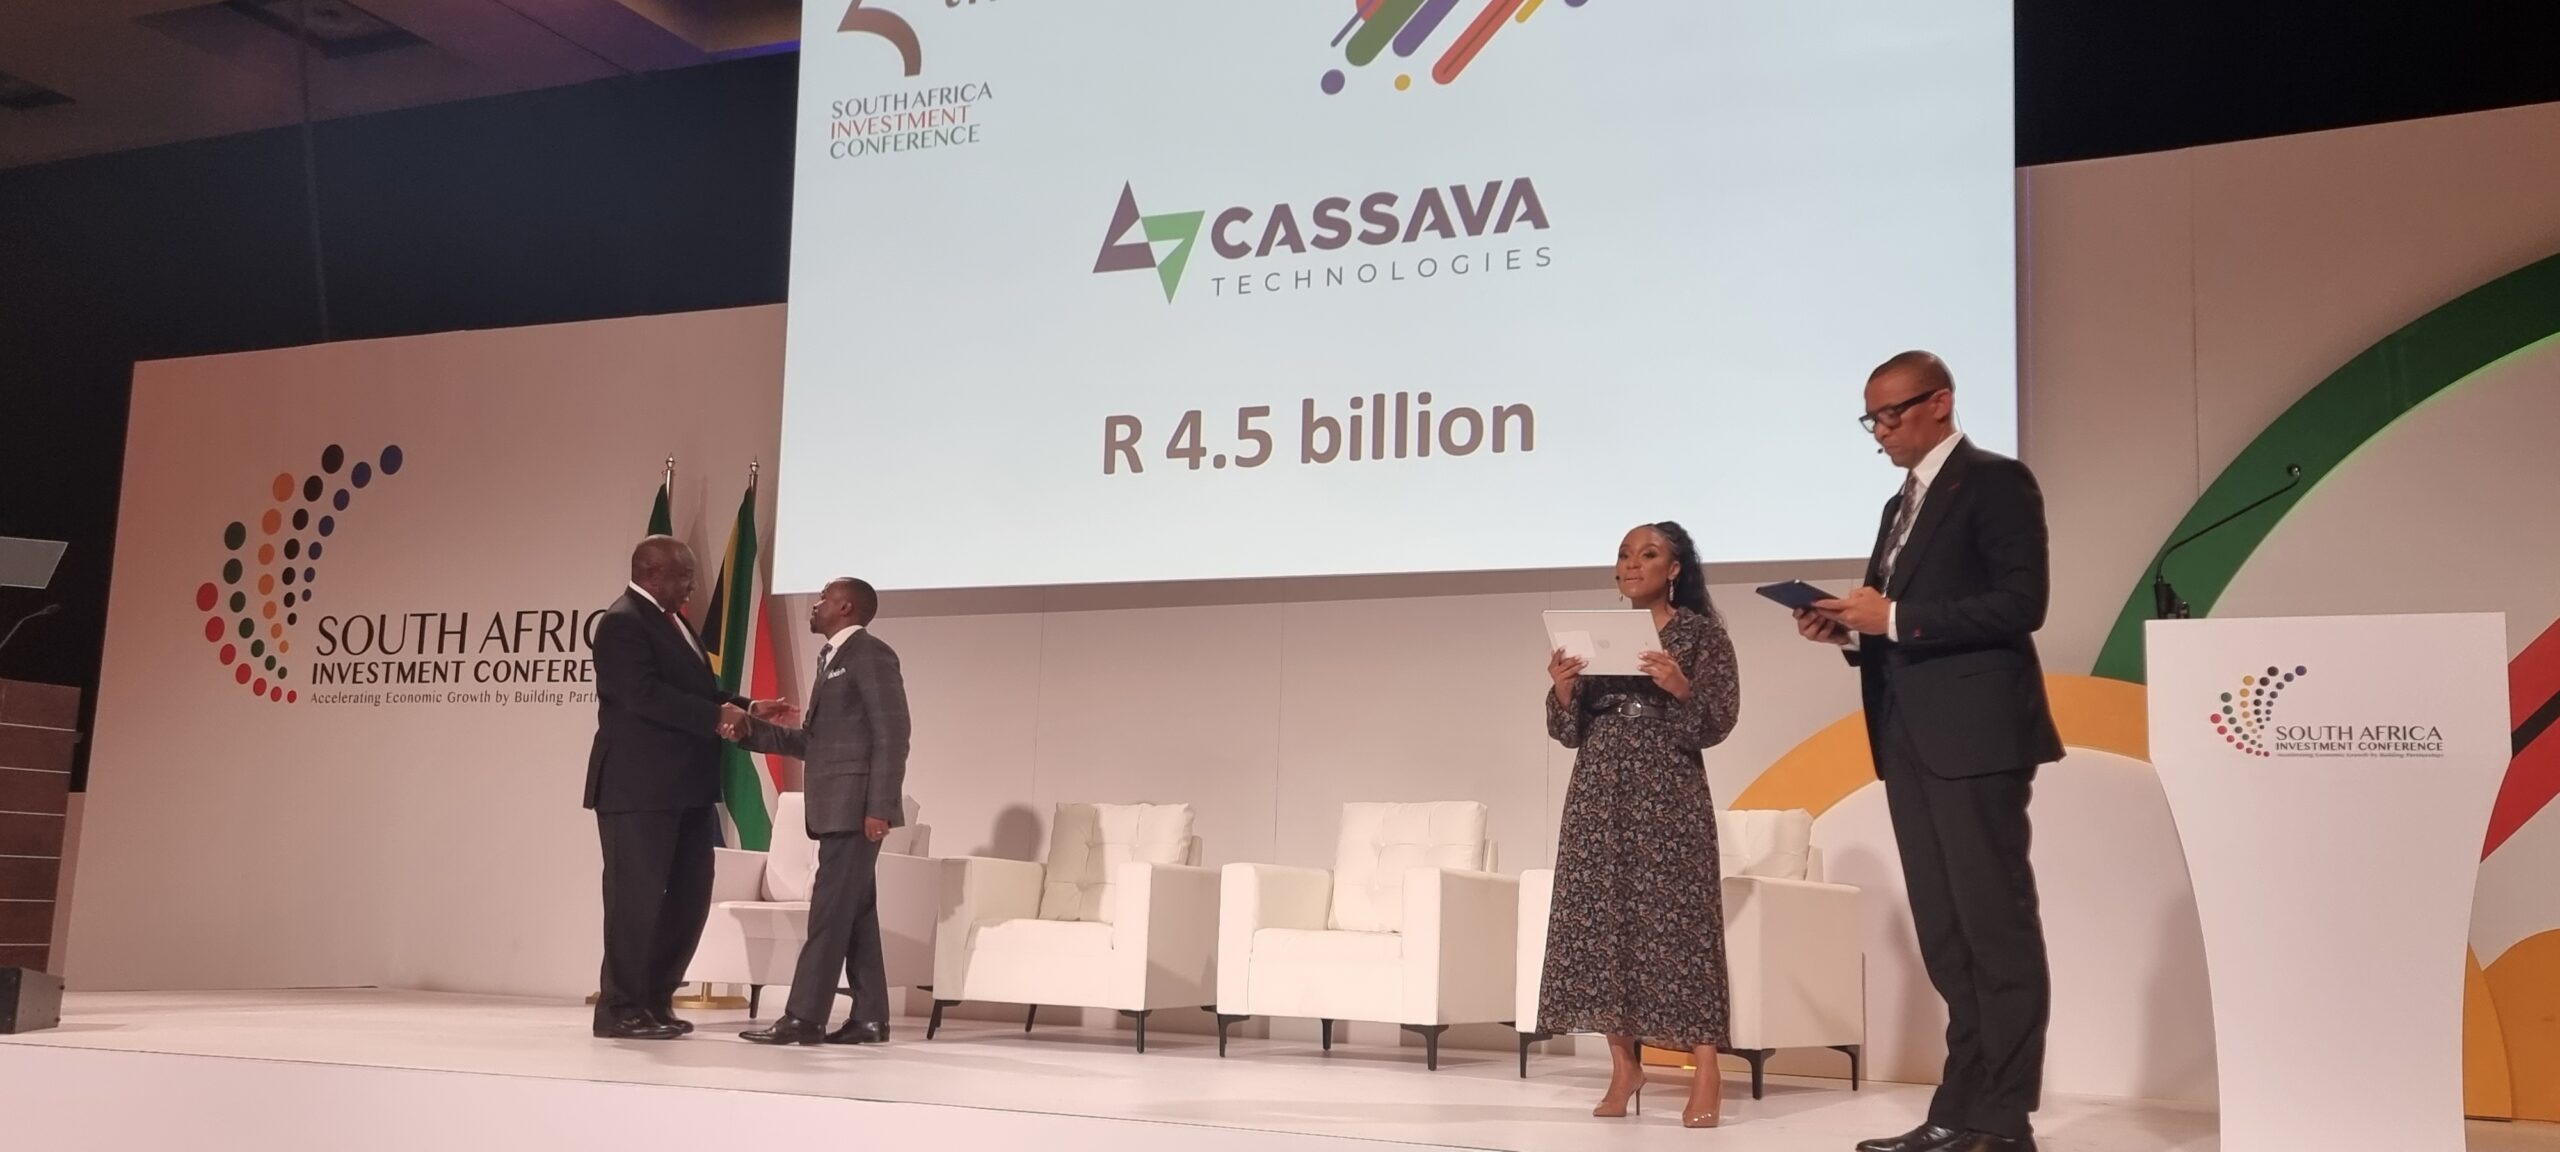 Cassava Technologies to Invest $240K in Alignment with Ramaphosa's Initiatives